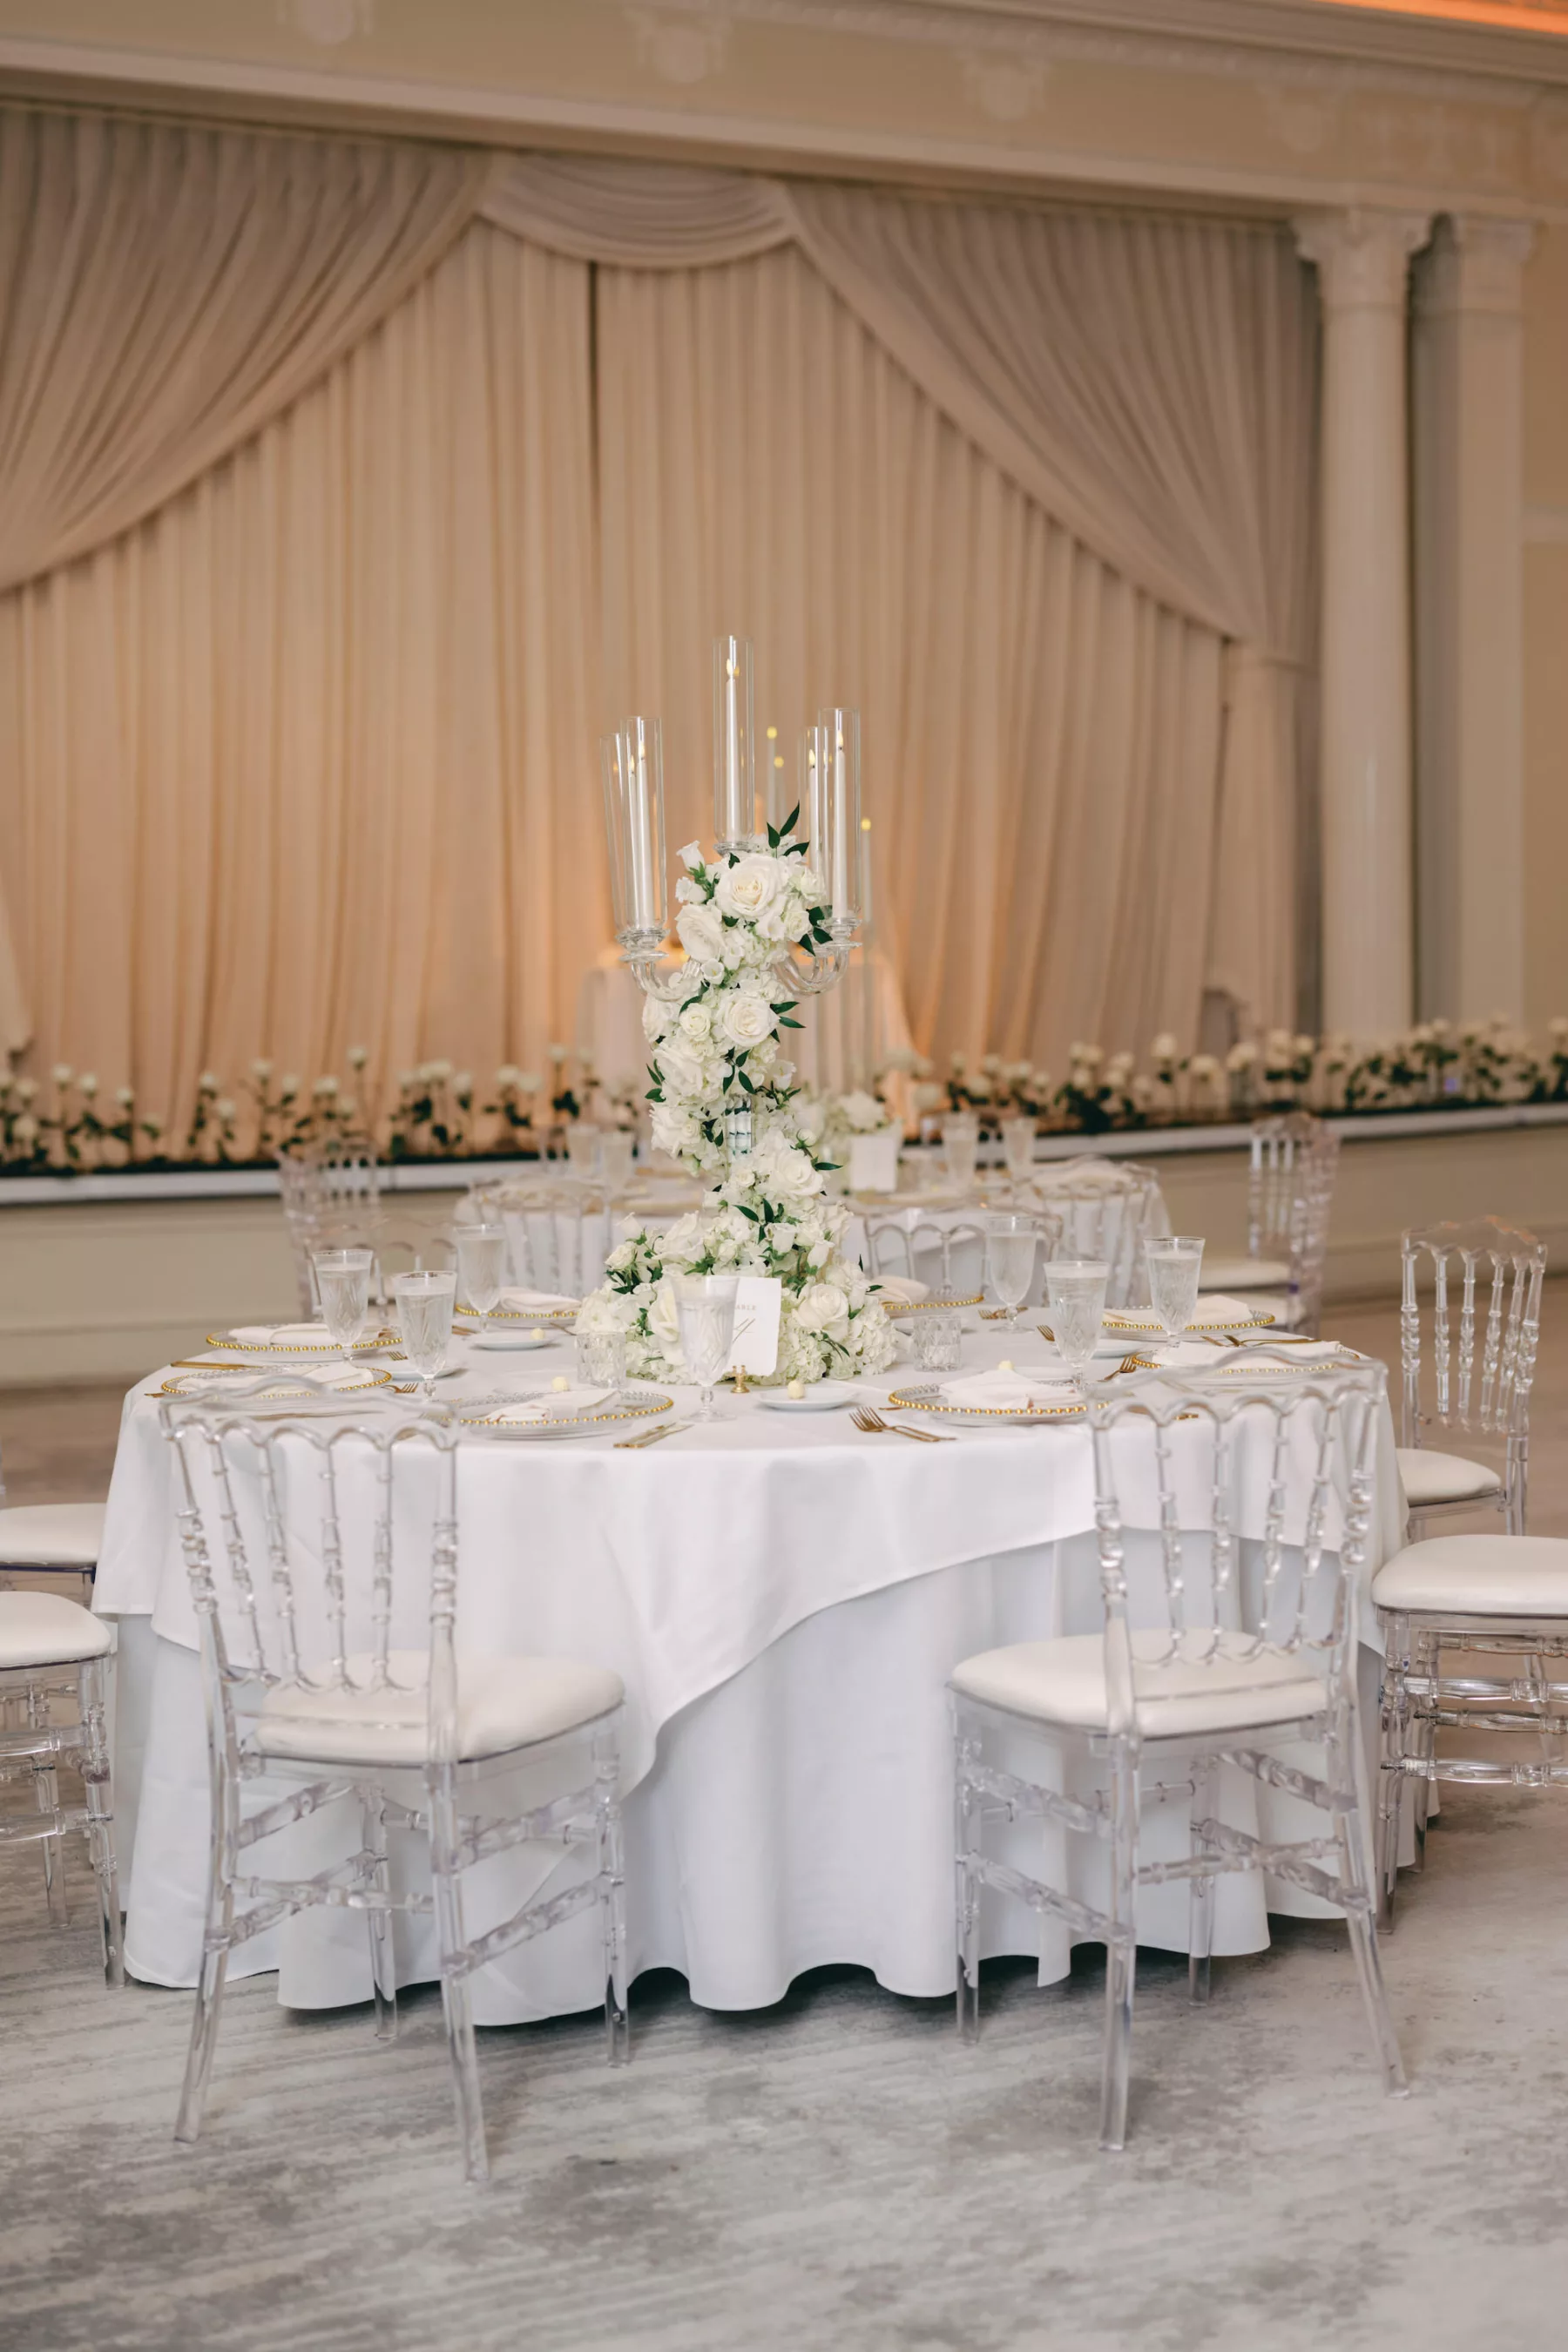 Timeless Monochromatic Ballroom Wedding Reception Centerpiece Decor Ideas | Silver Candelabra Wrapped in White Roses and Greenery | White and Gold Place Setting Inspiration | Clear Ghost Chairs